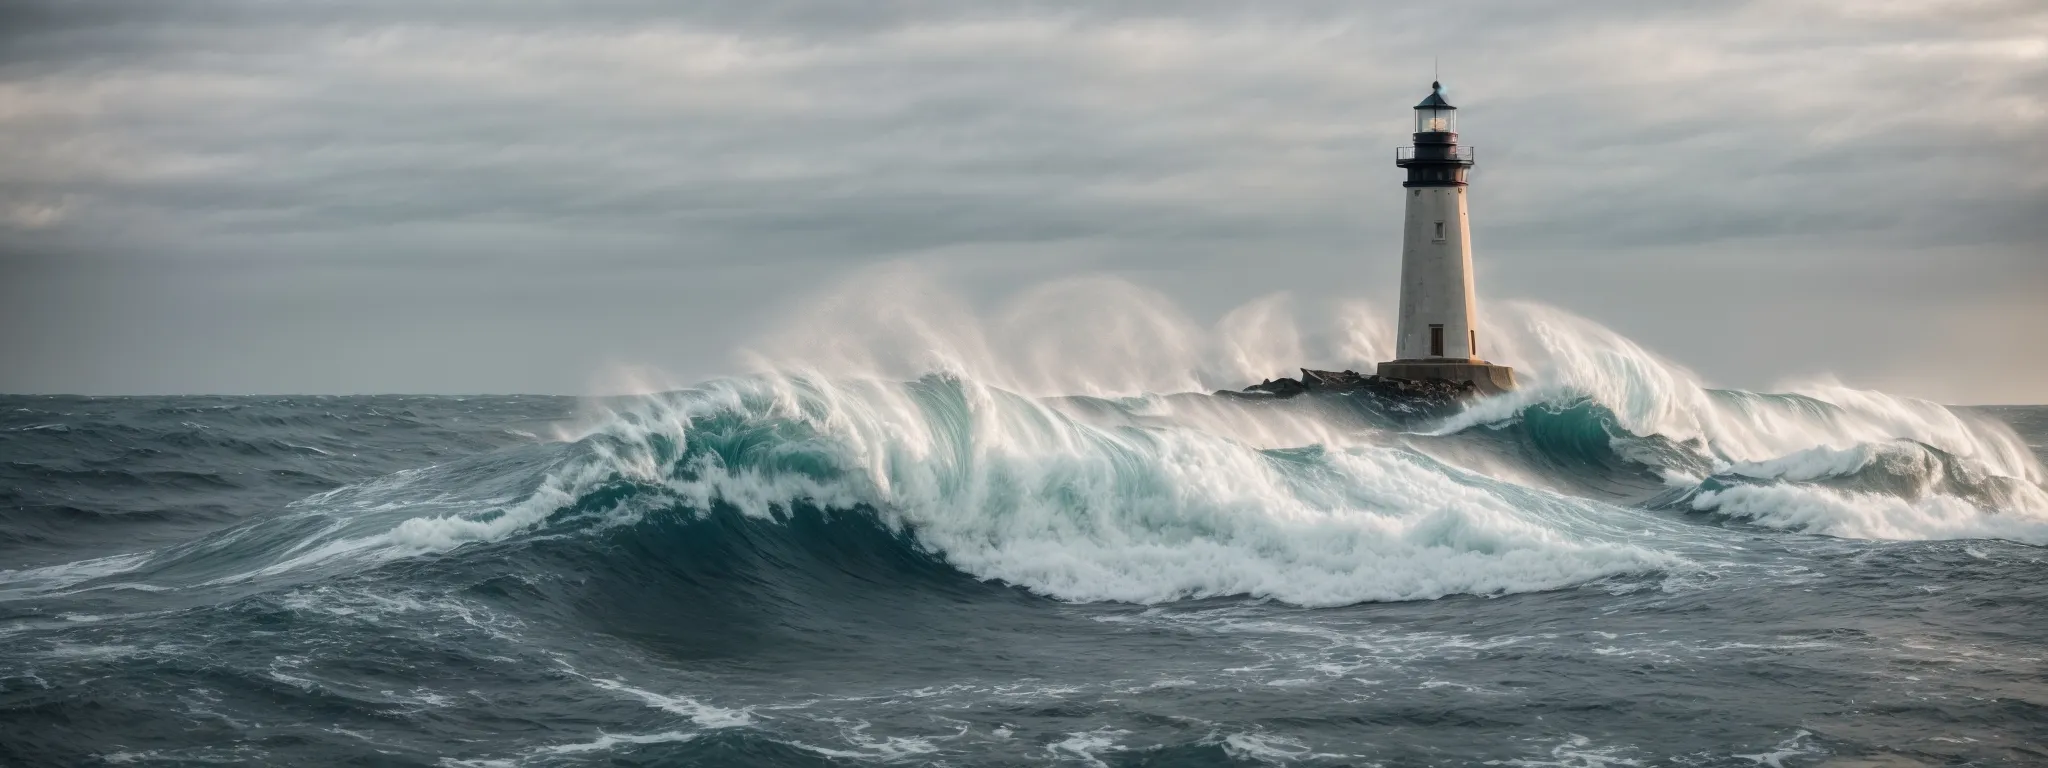 a visible lighthouse stands tall, guiding amidst a digital sea of search queries and data waves.